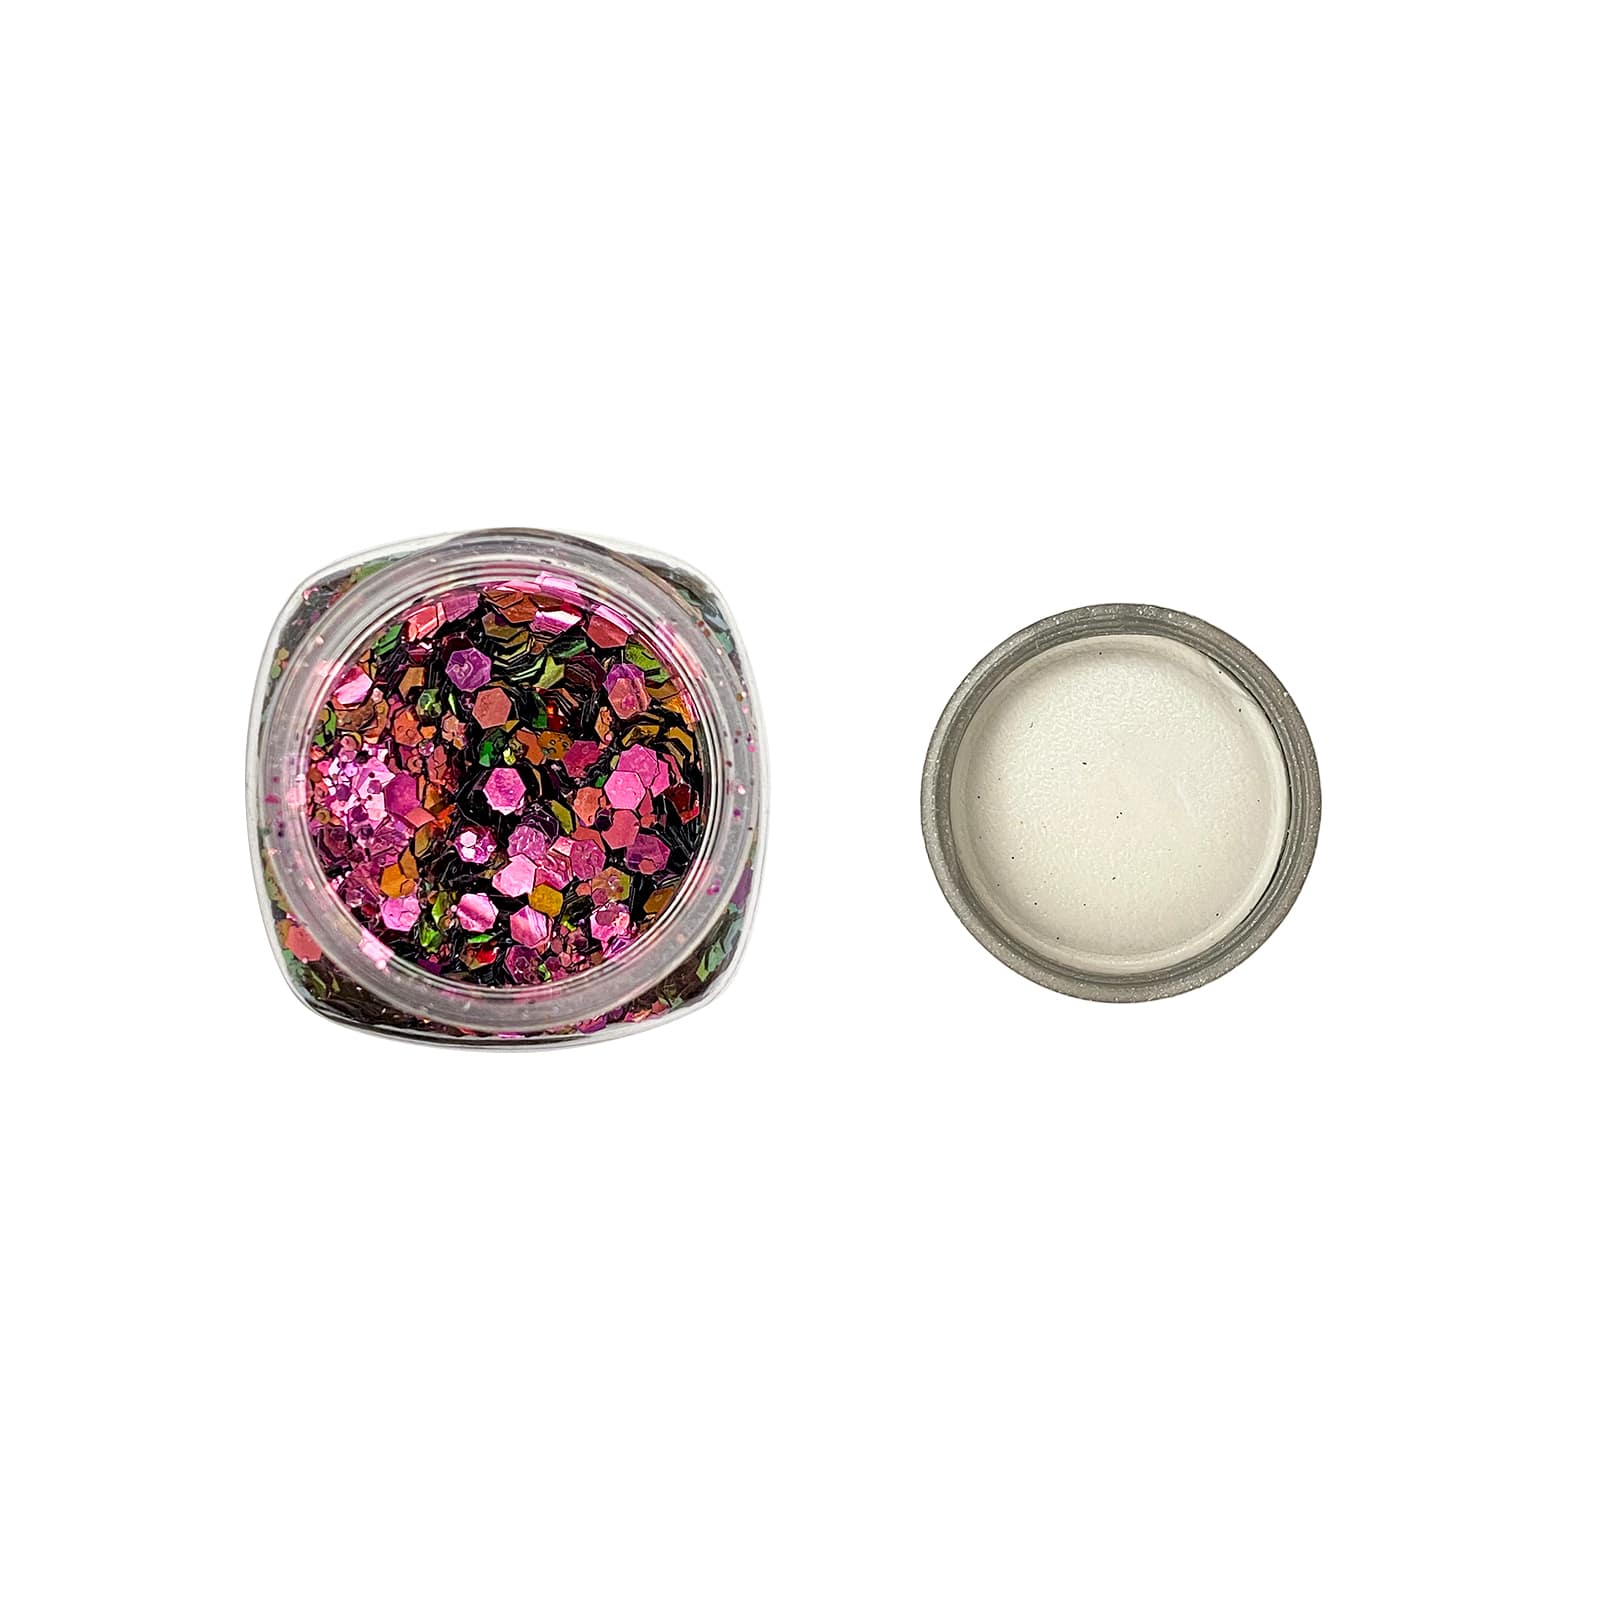 Color Shift Specialty Polyester Glitter by Recollections&#x2122;, 1oz.